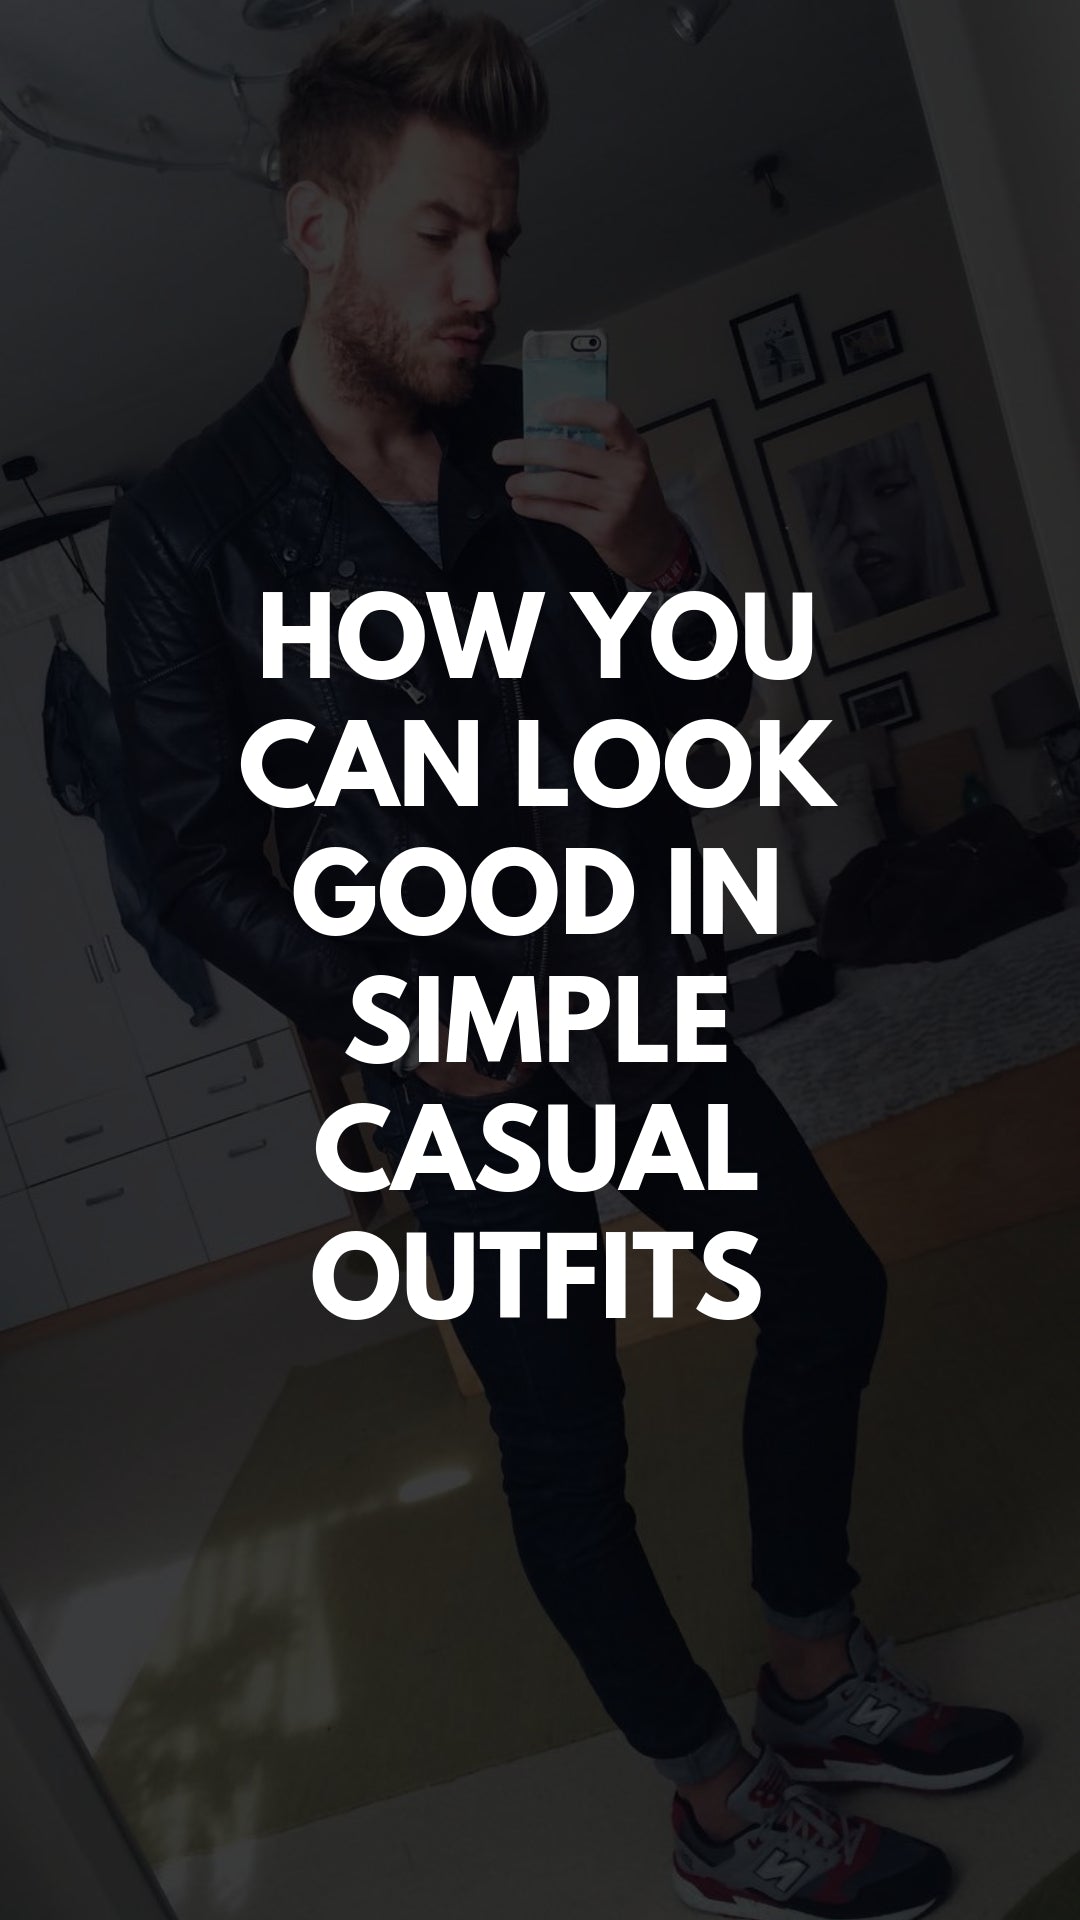 15 Insanely cool casual outfits for guys #casualoutfits #casualstyle #mensfashion #streetstyle 